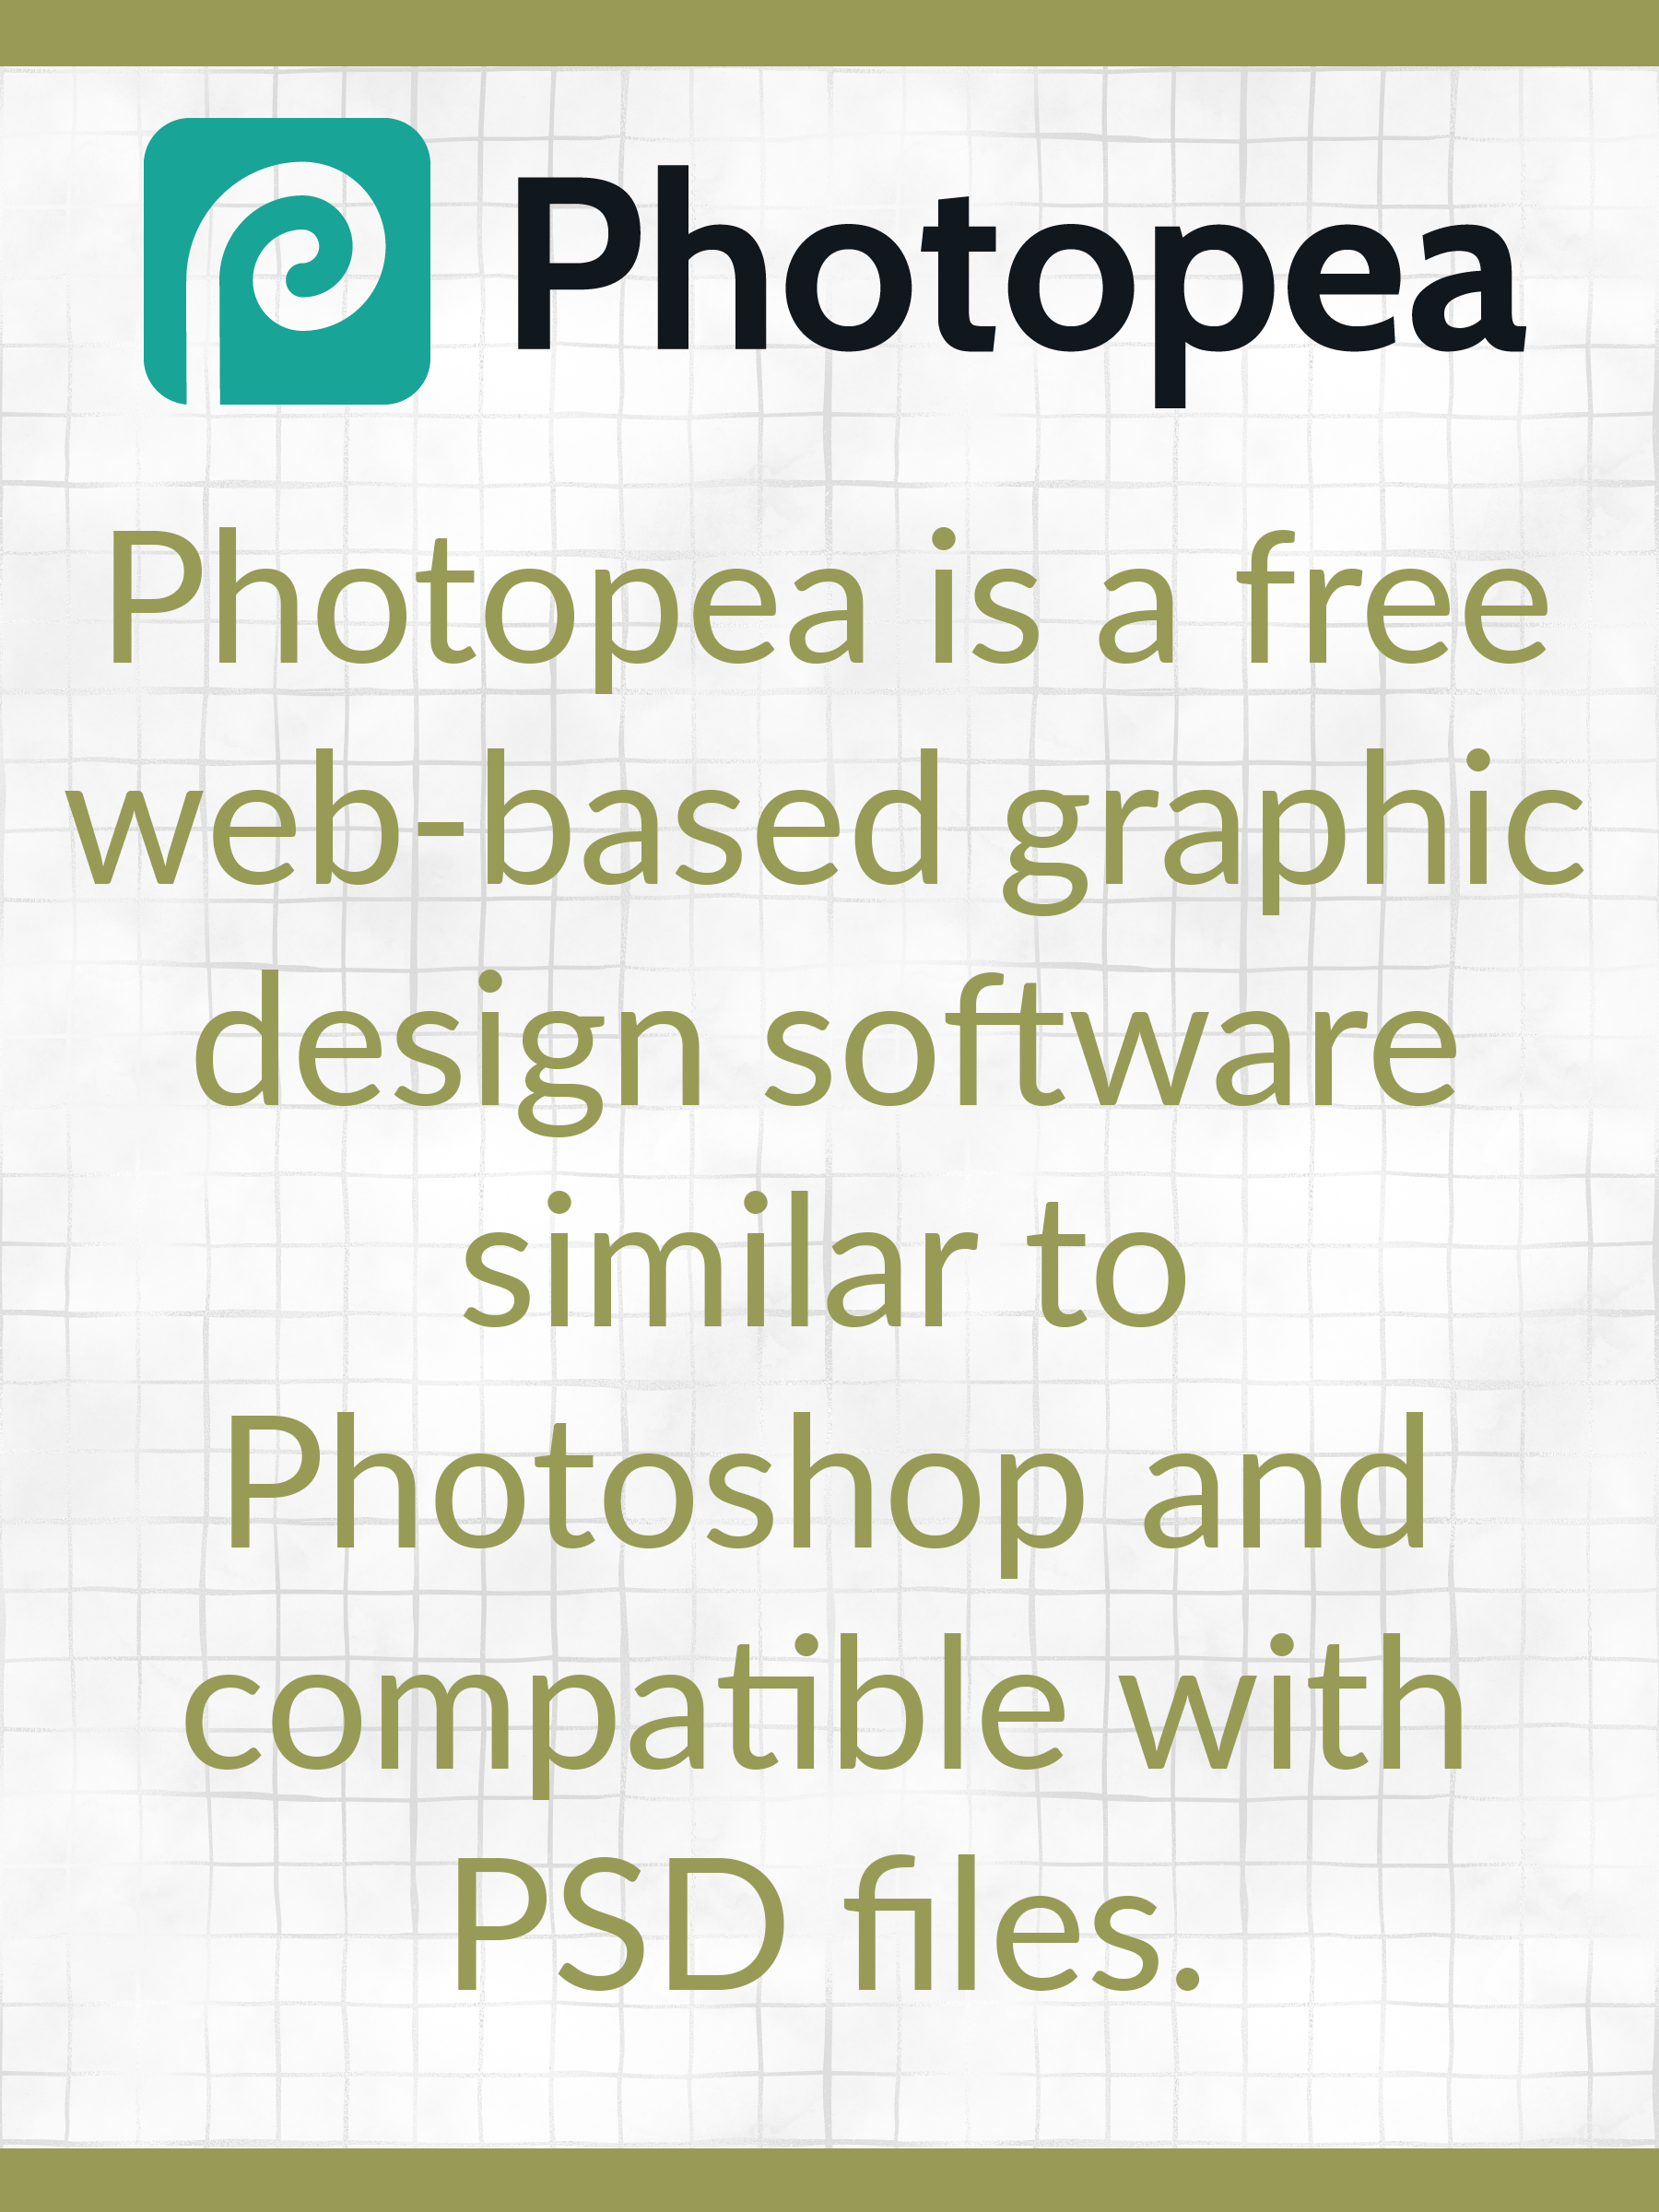 Link to free online editor Photopea